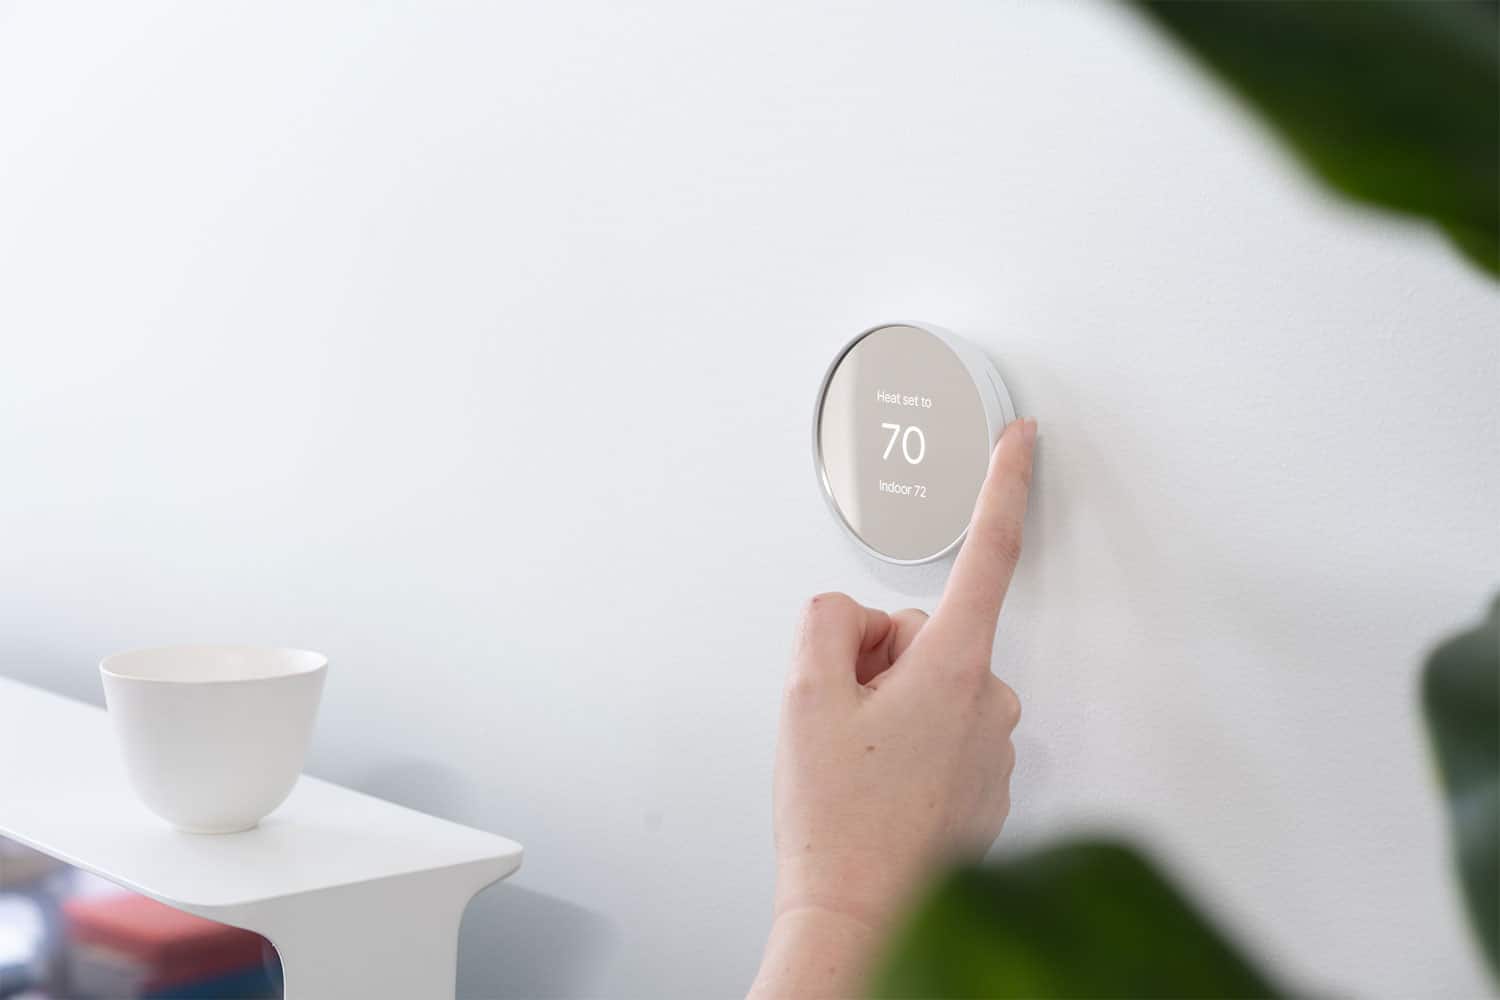 Google launches Nest Thermostat with simpler design and touch control.